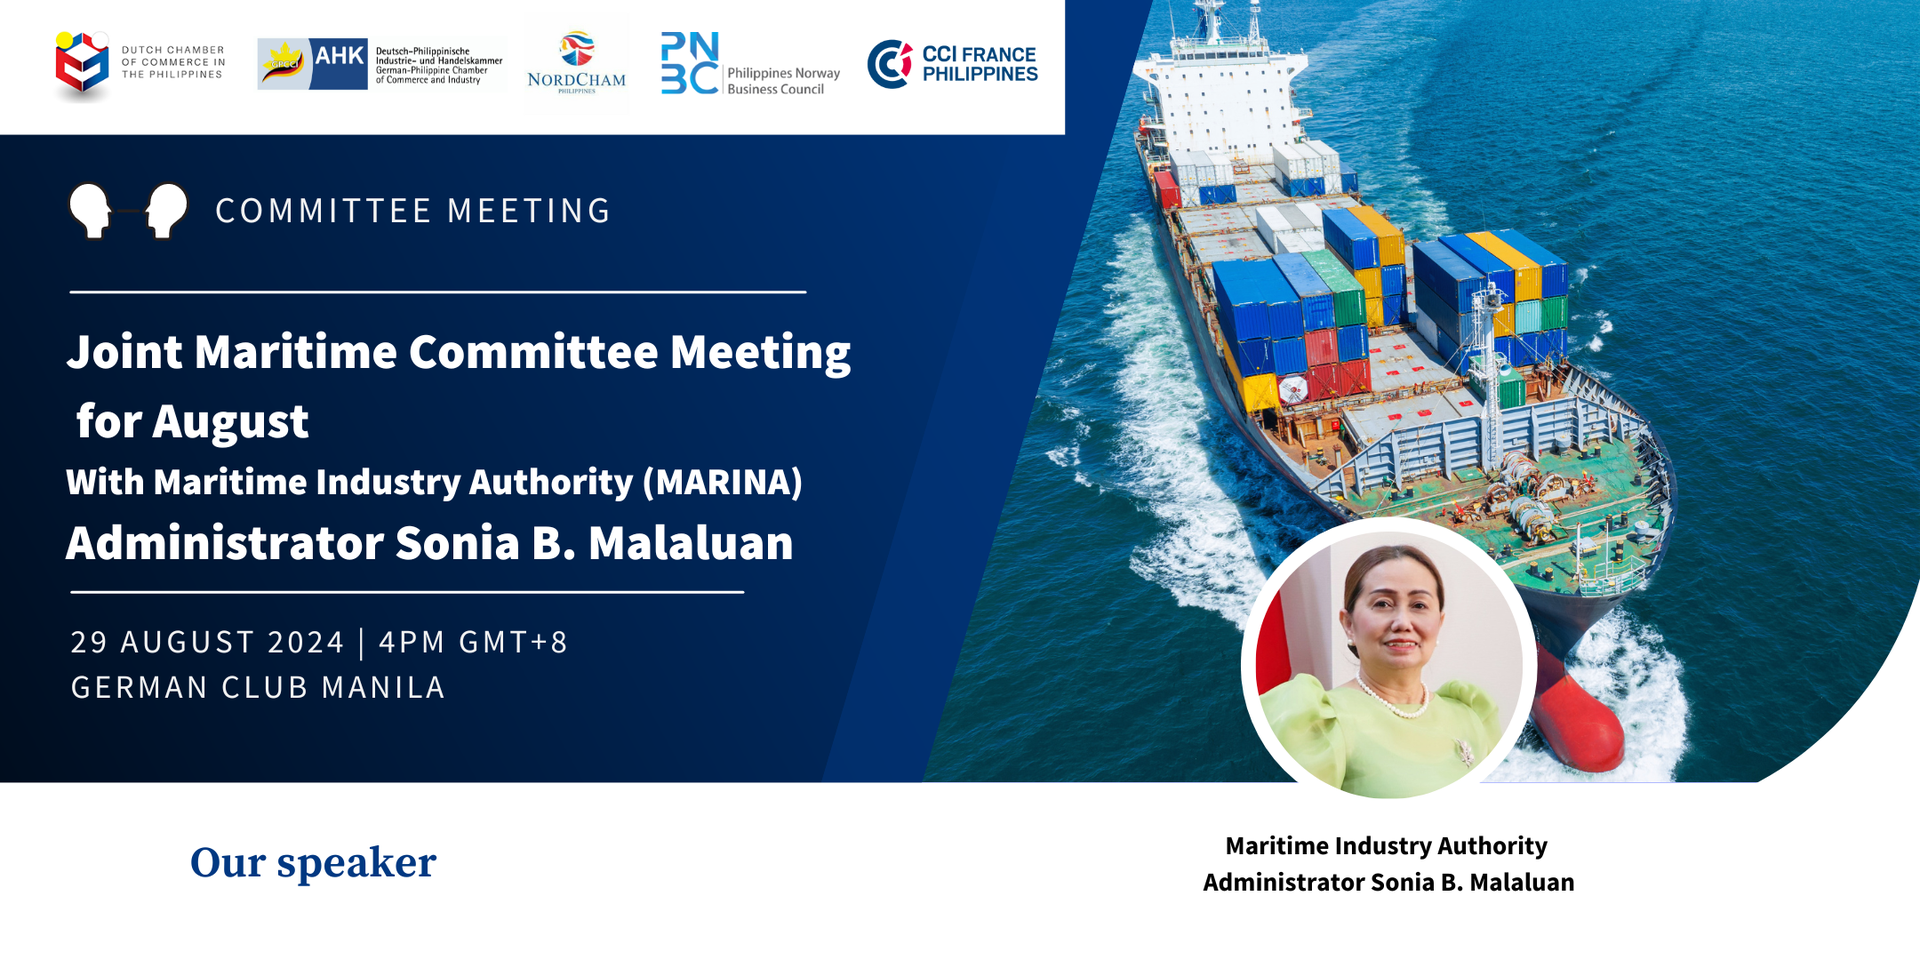 thumbnails JOINT MARITIME COMMITTEE MEETING | 29 AUGUST 2024 | GERMAN CLUB MANILA